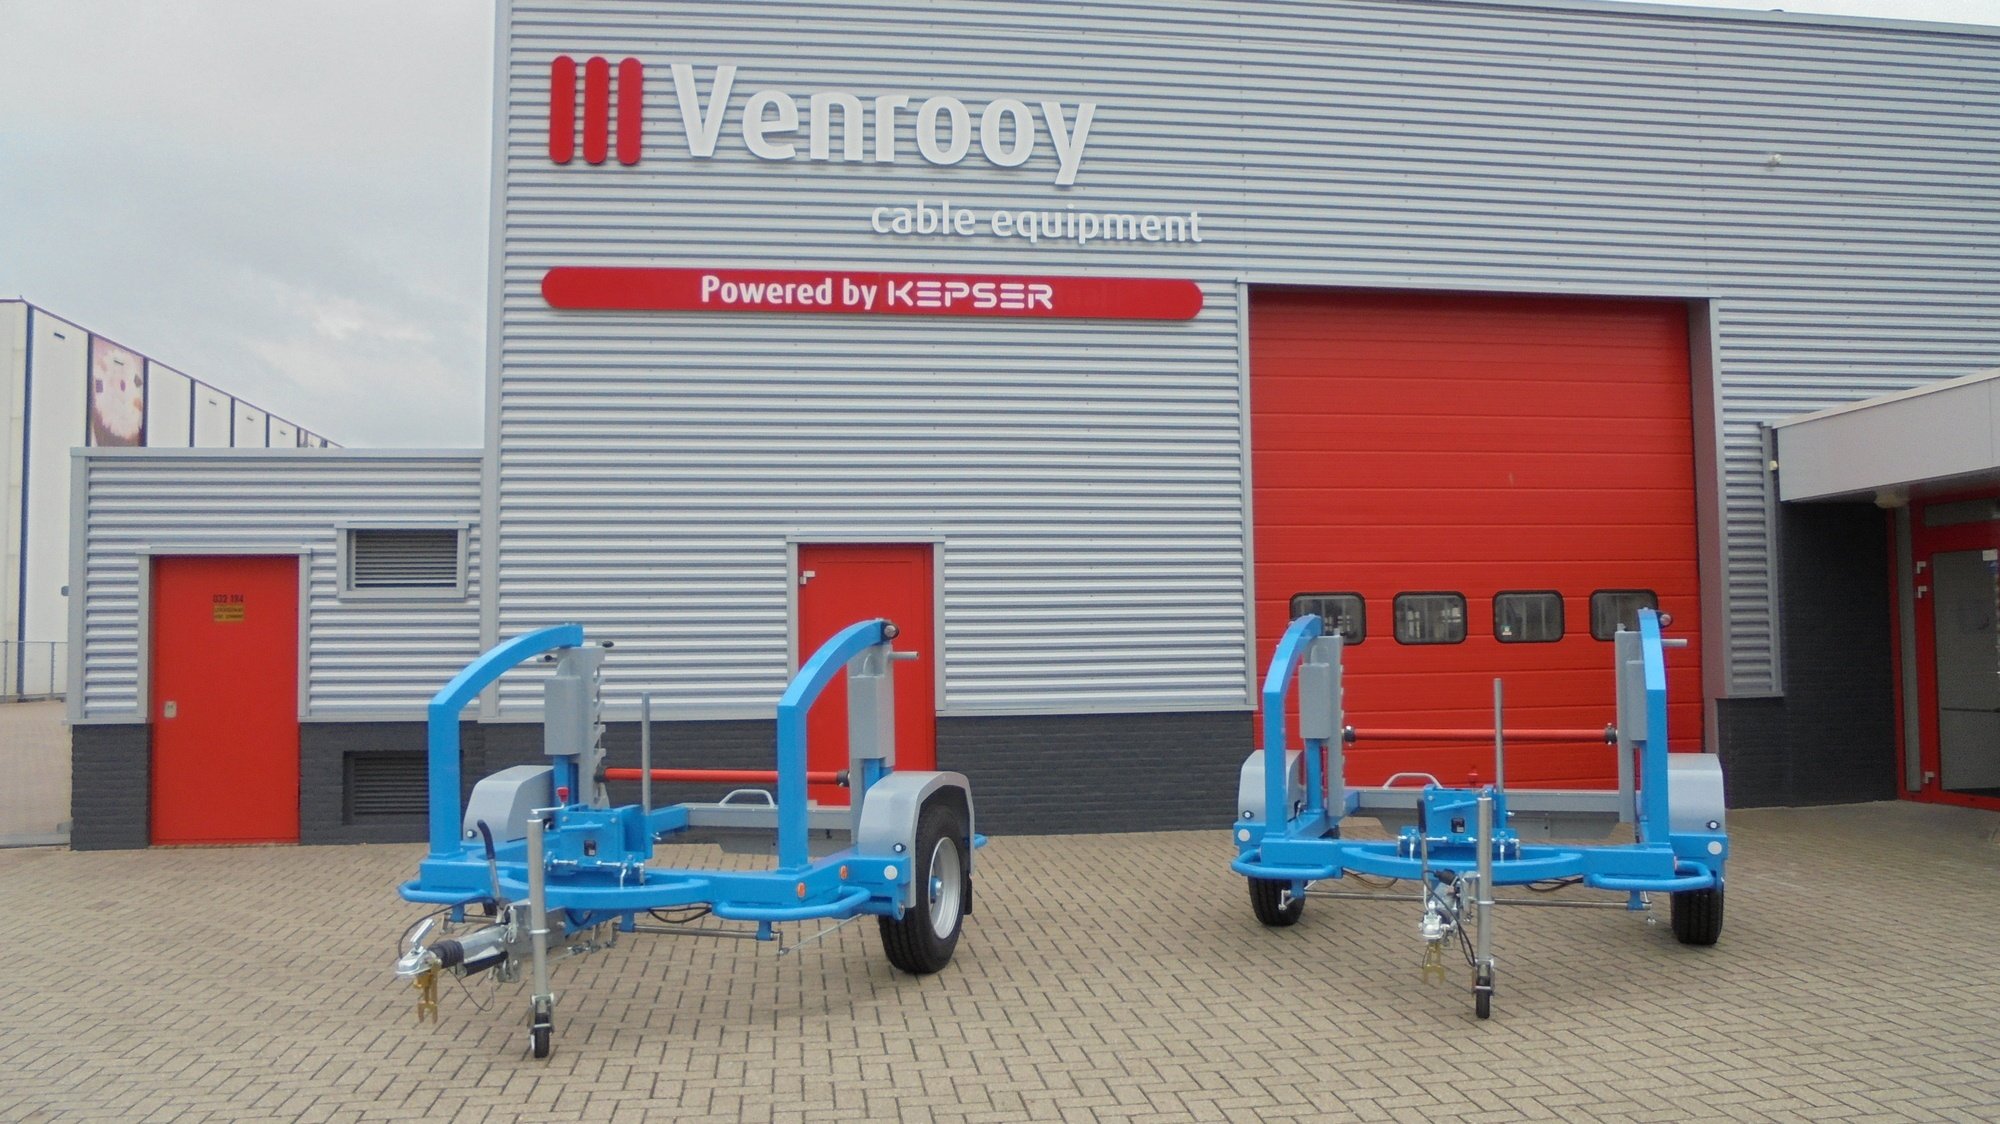 Venrooy cable equipment